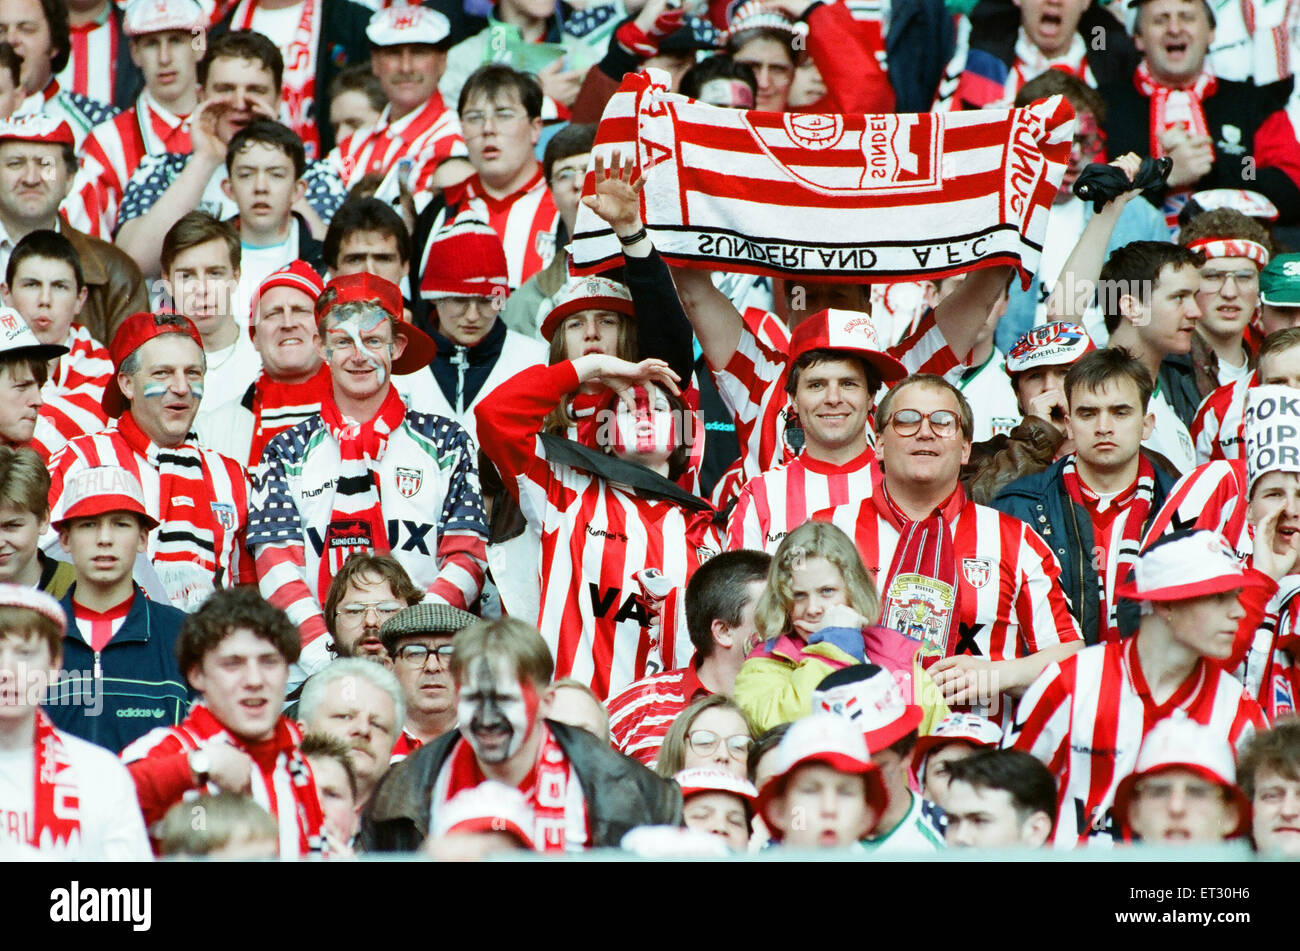 Liverpool 2-0 Sunderland, FA Cup Final, Wembley Stadium, Saturday 9th May 1992. Sunderland fans and supporters Stock Photo